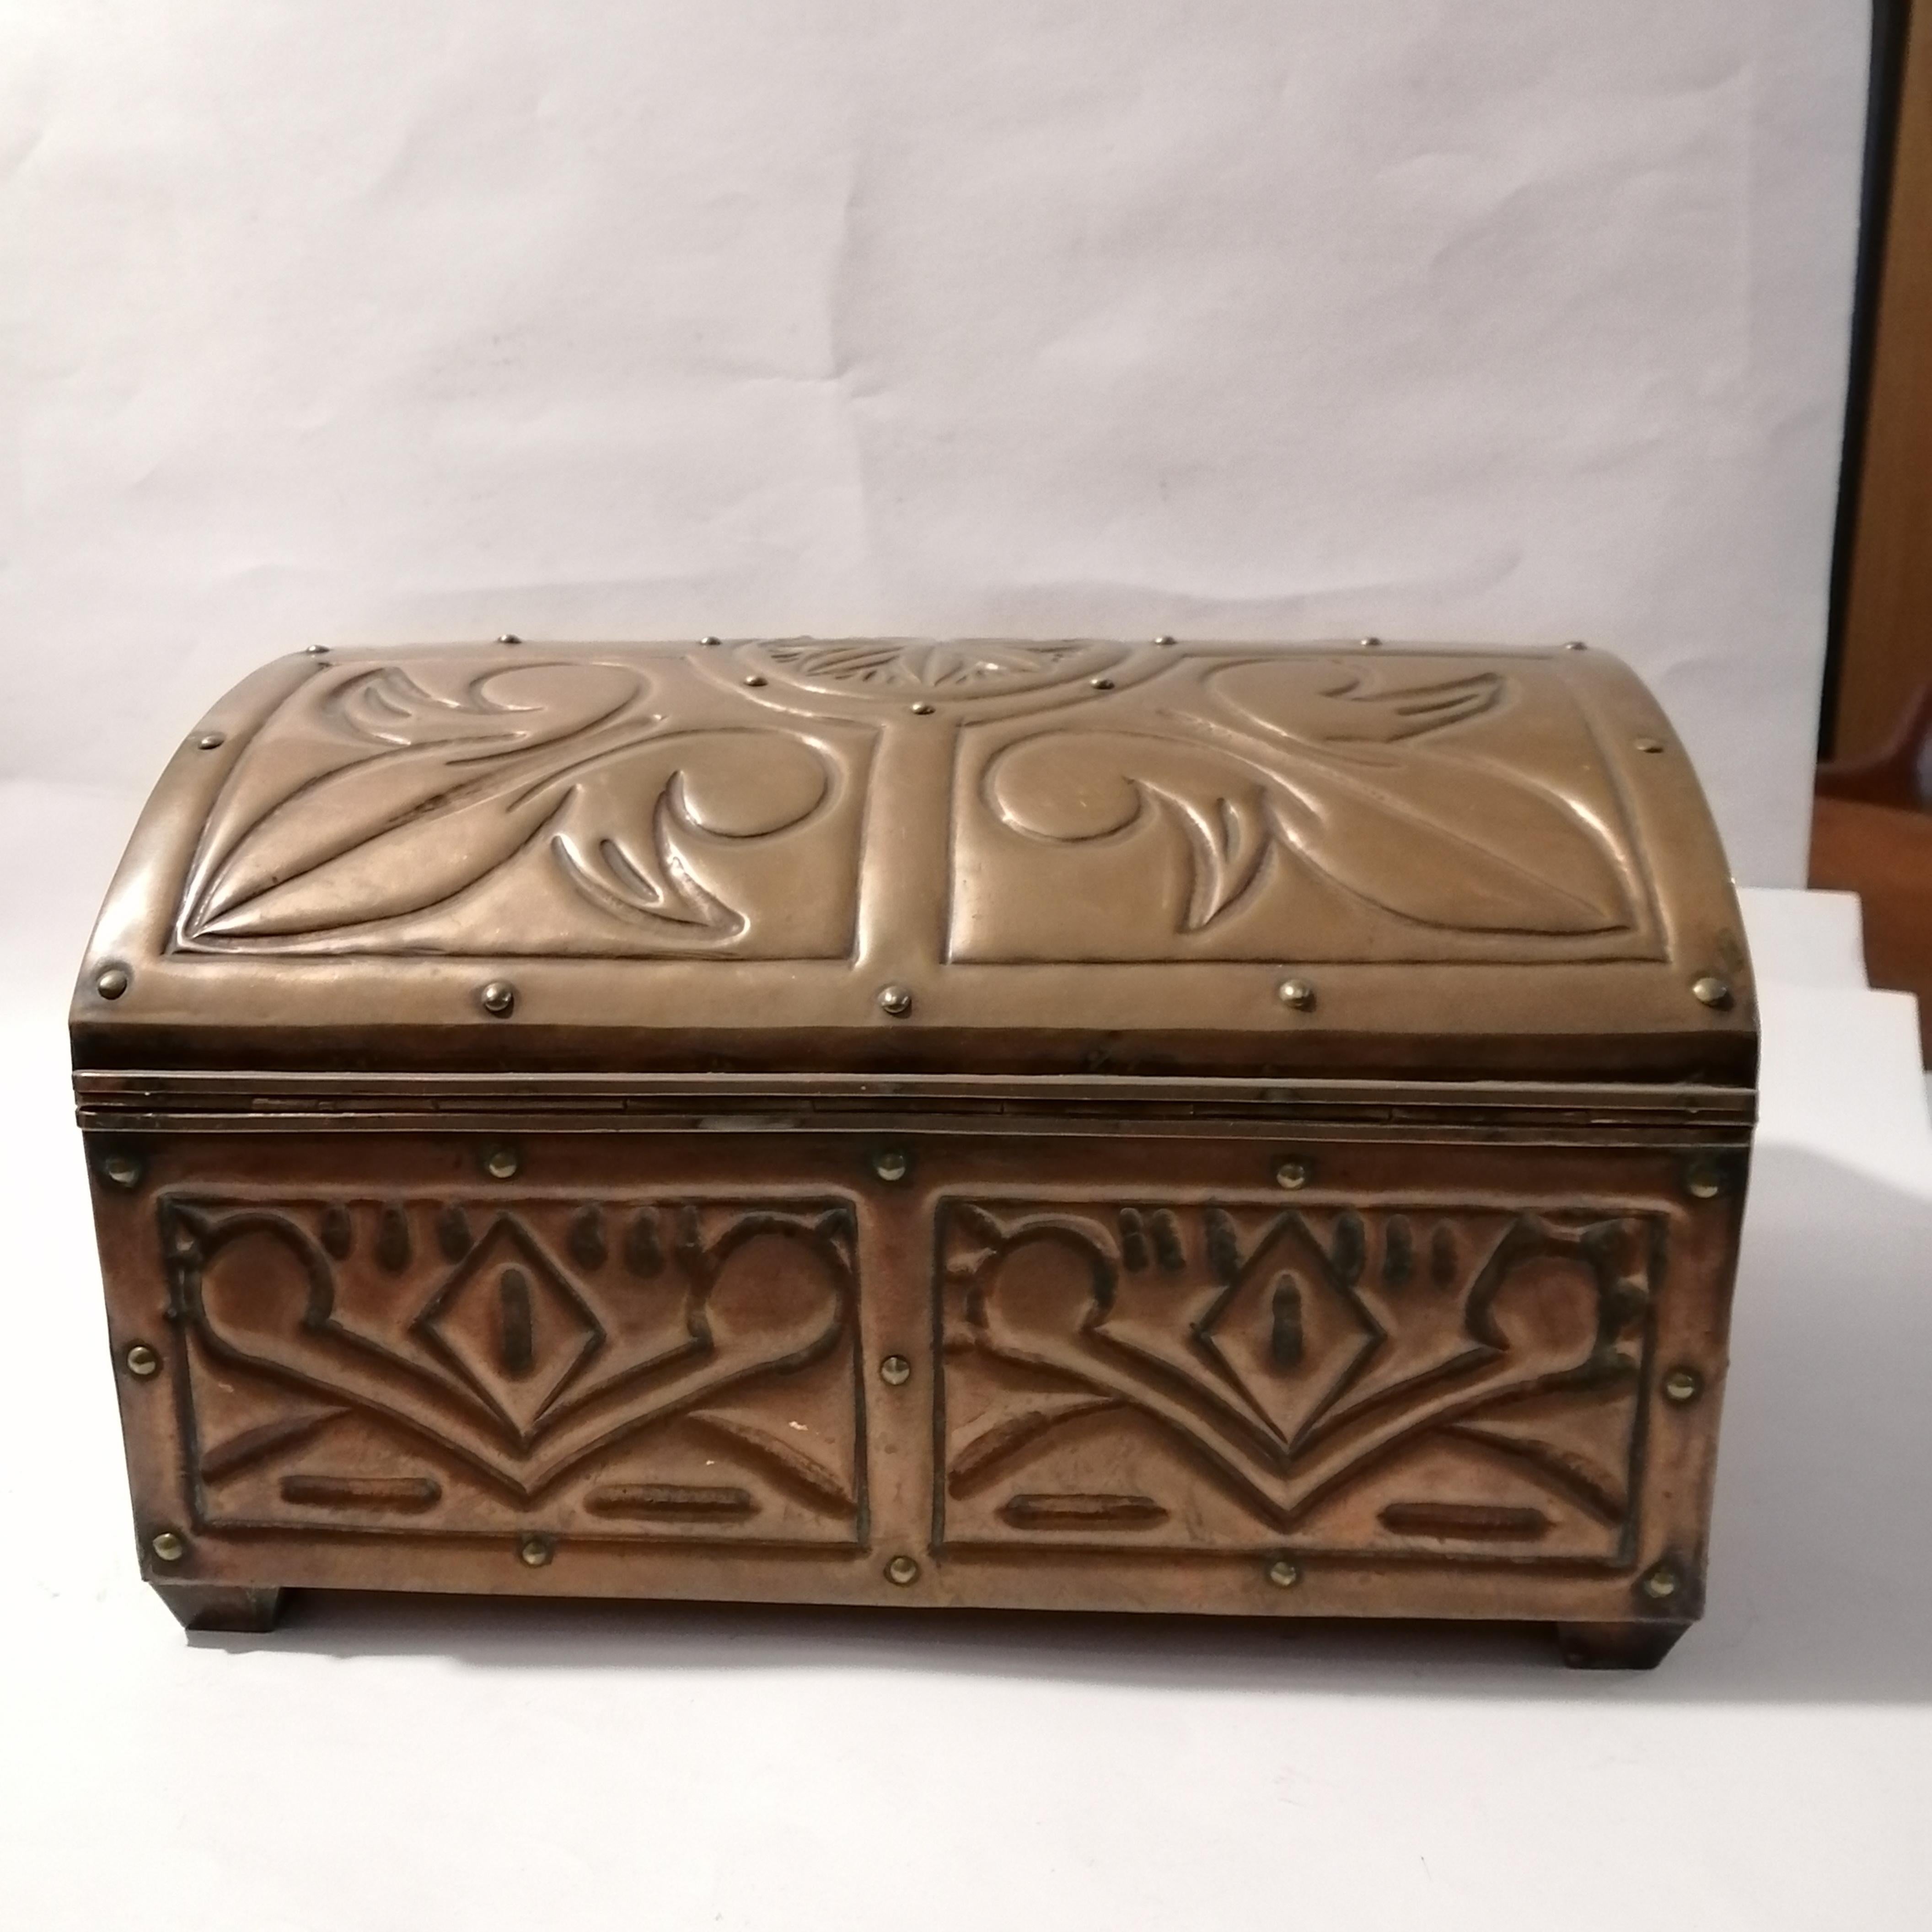 Mexican Mid-Century Modern Embossed Copper Jewel Box For Sale 5